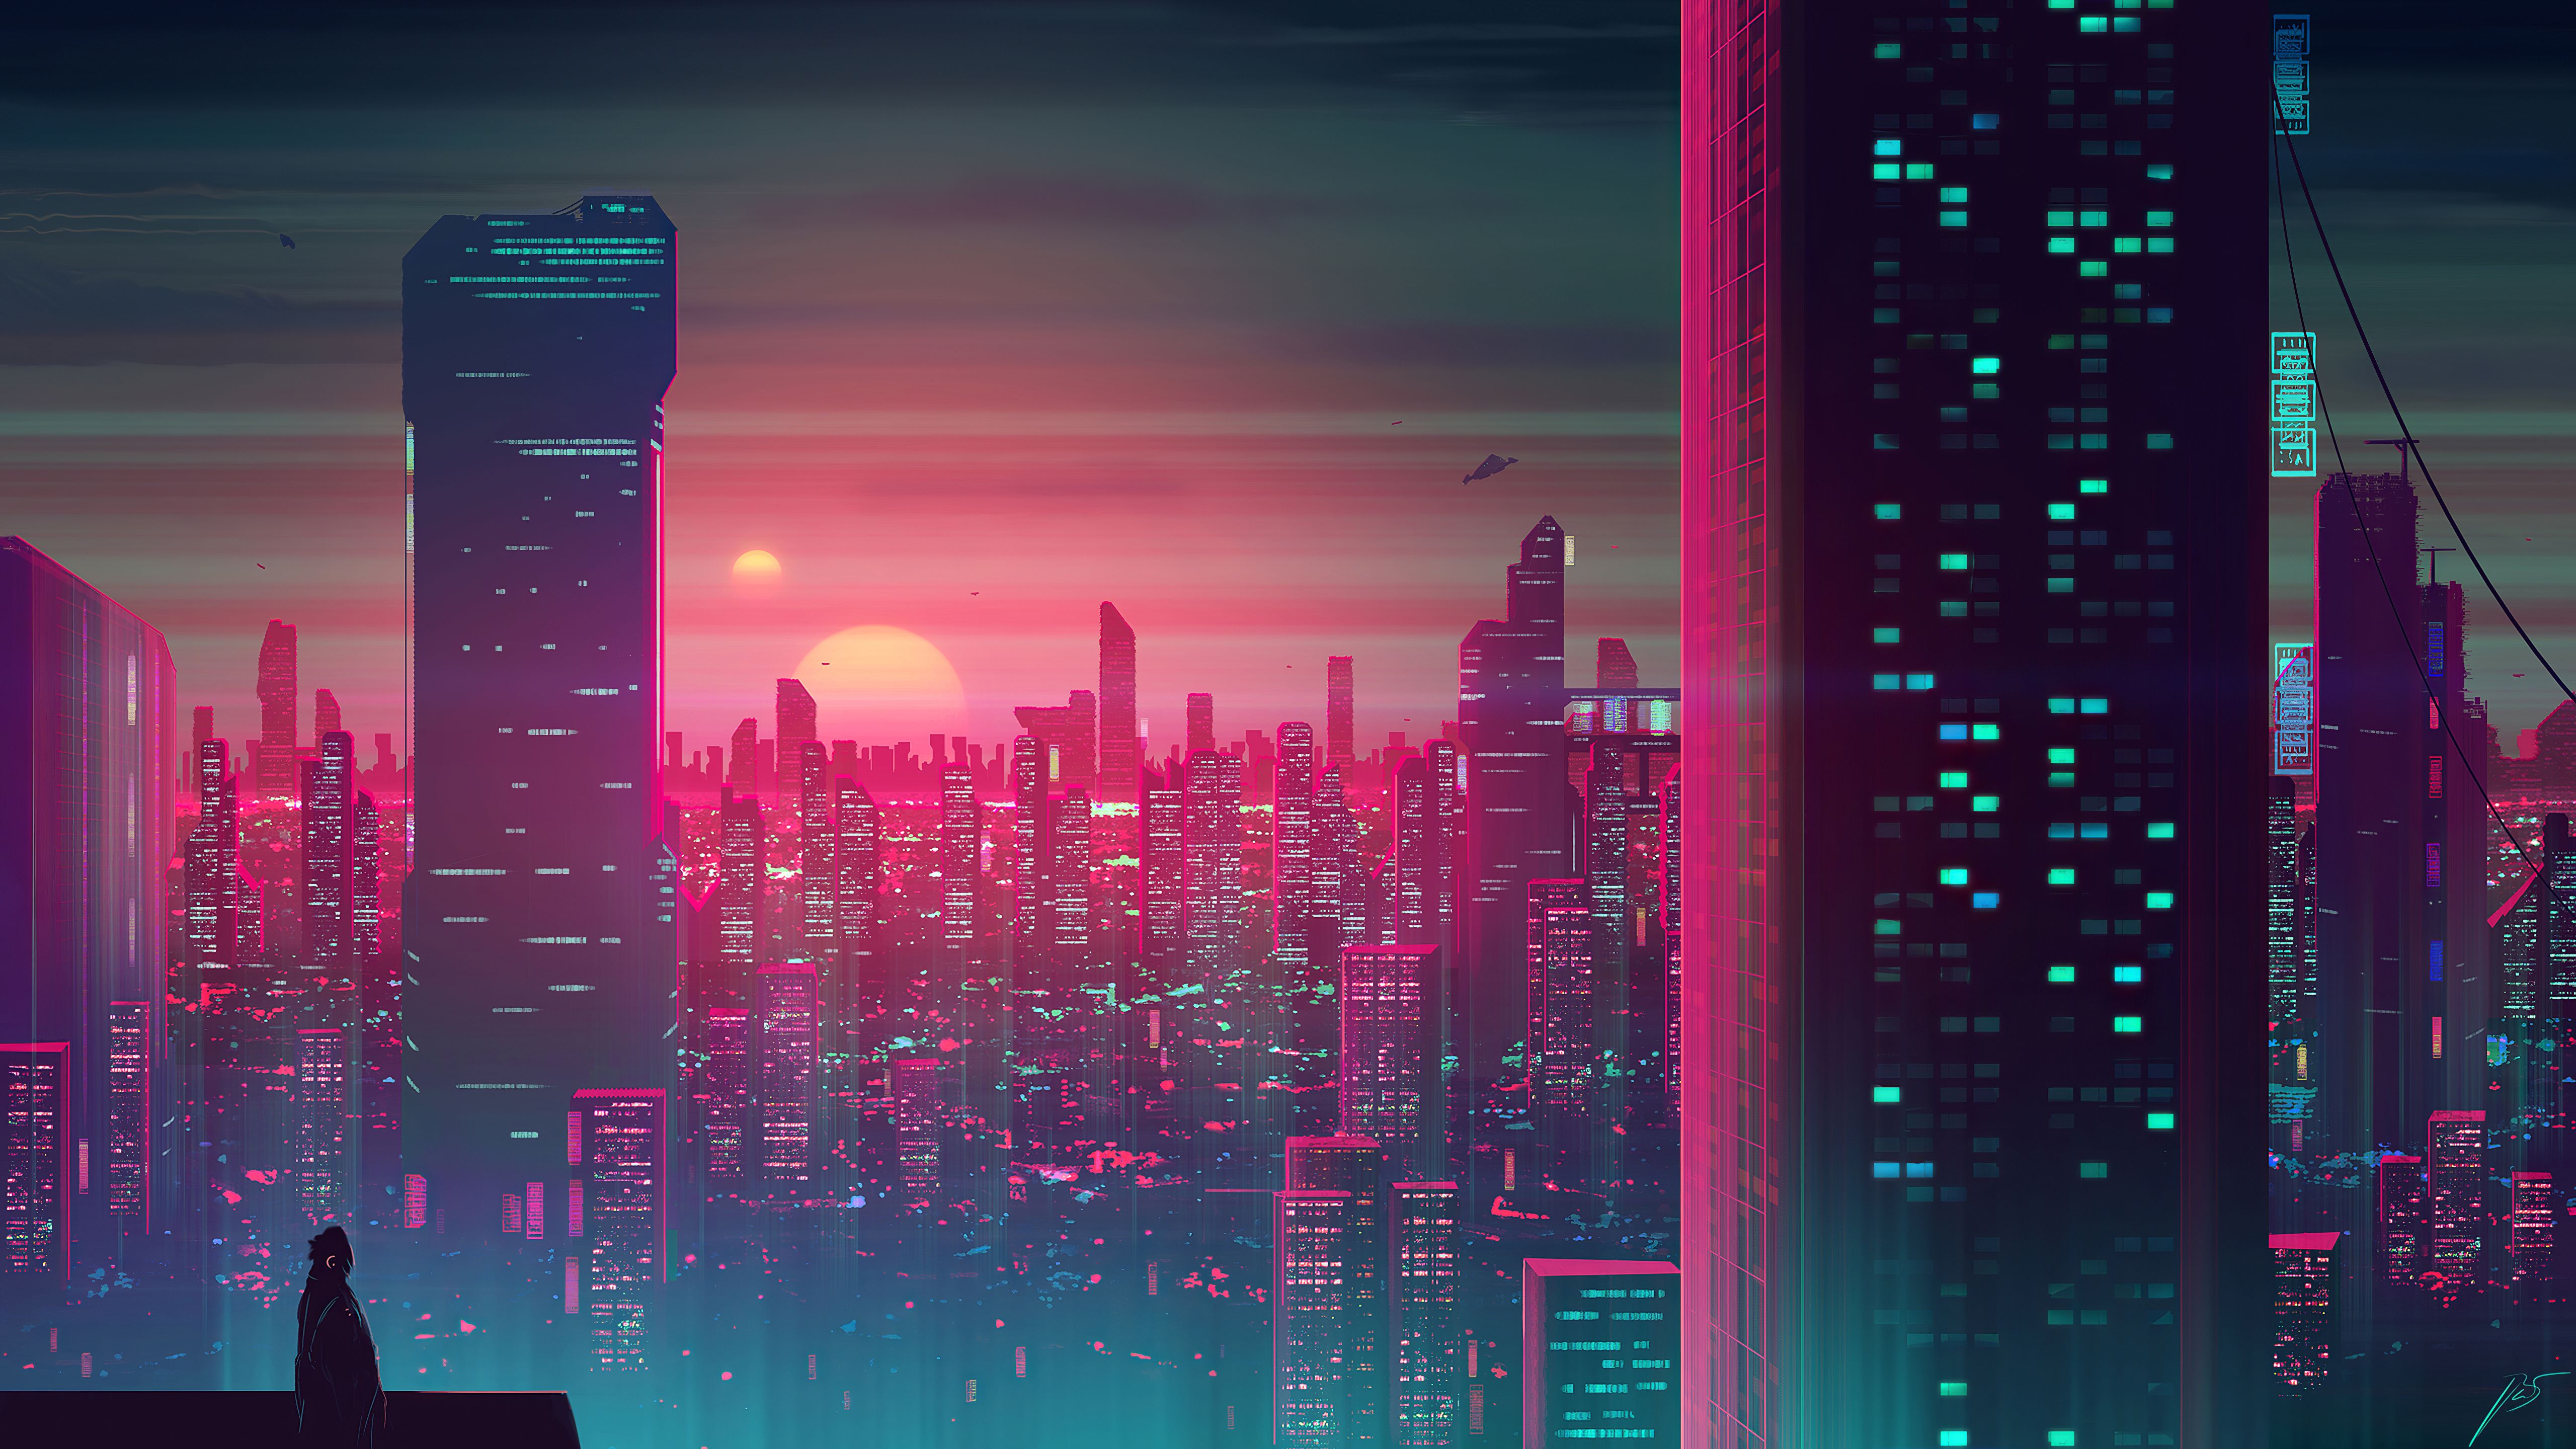 Wallpaper City Skyline During Night Time, Background Free Image